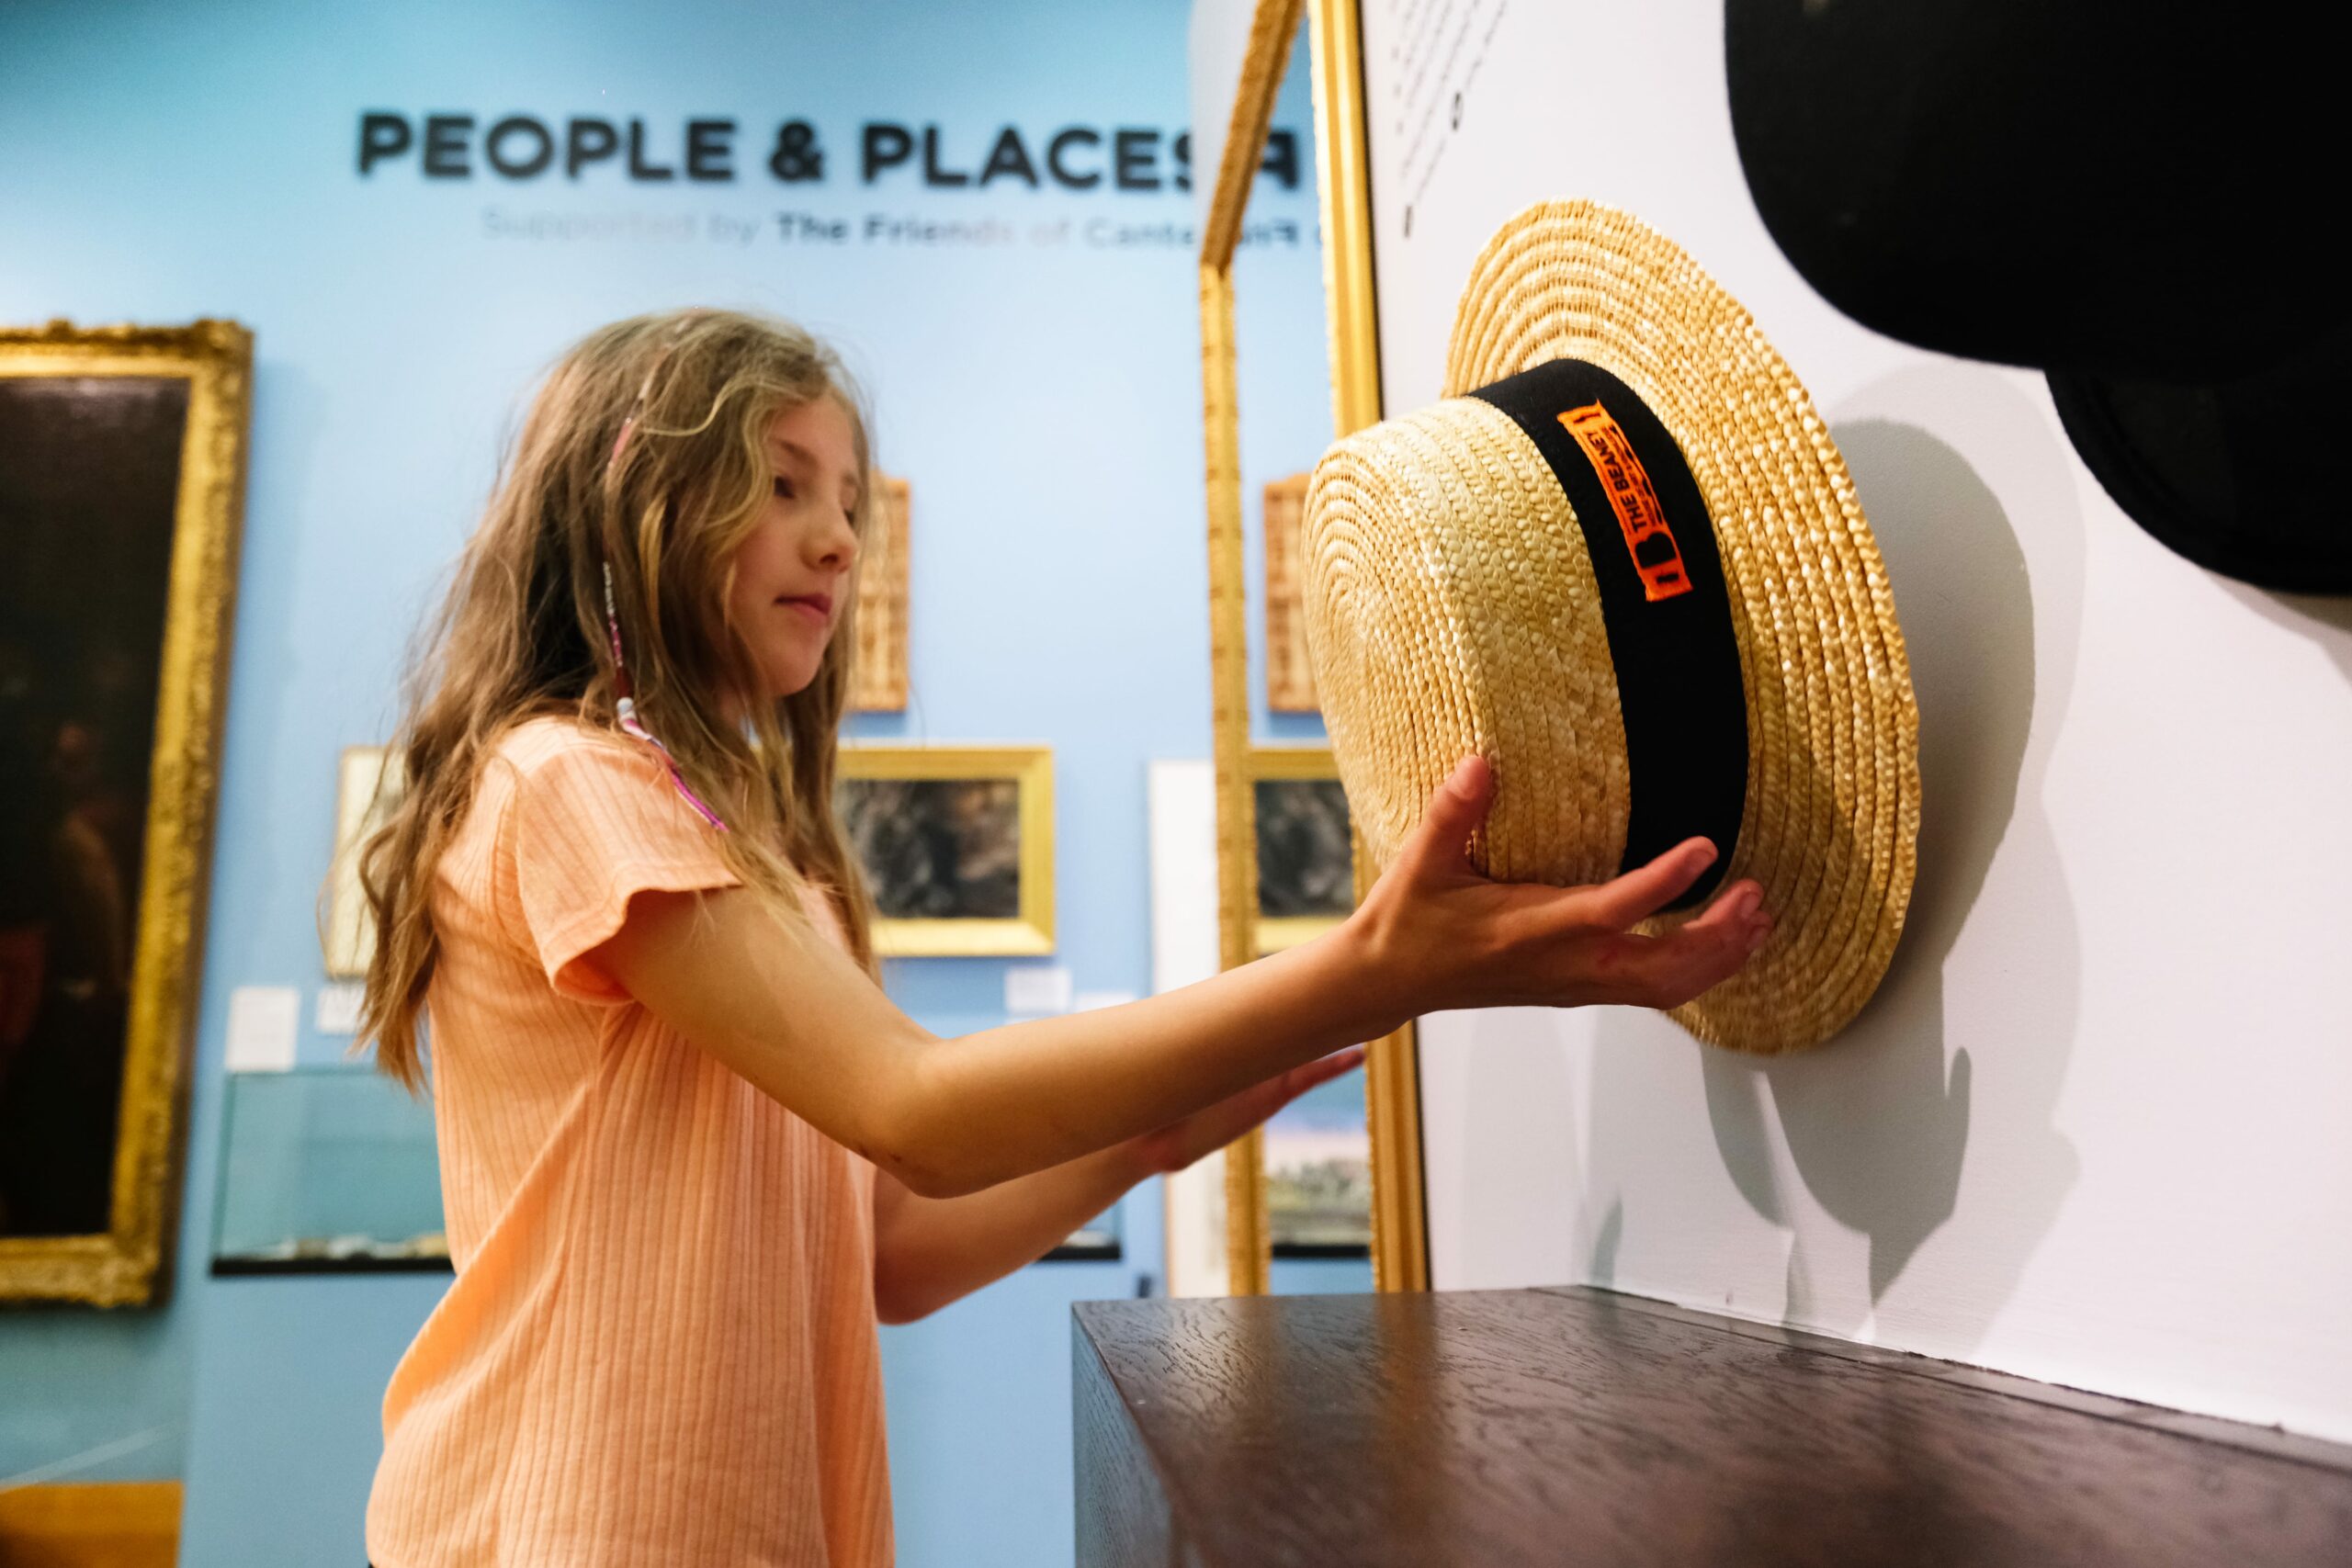 A young girl taking a straw boater hat from a hook in front of a mirror. On the blue gallery wall behind her are the words 'People & Places'